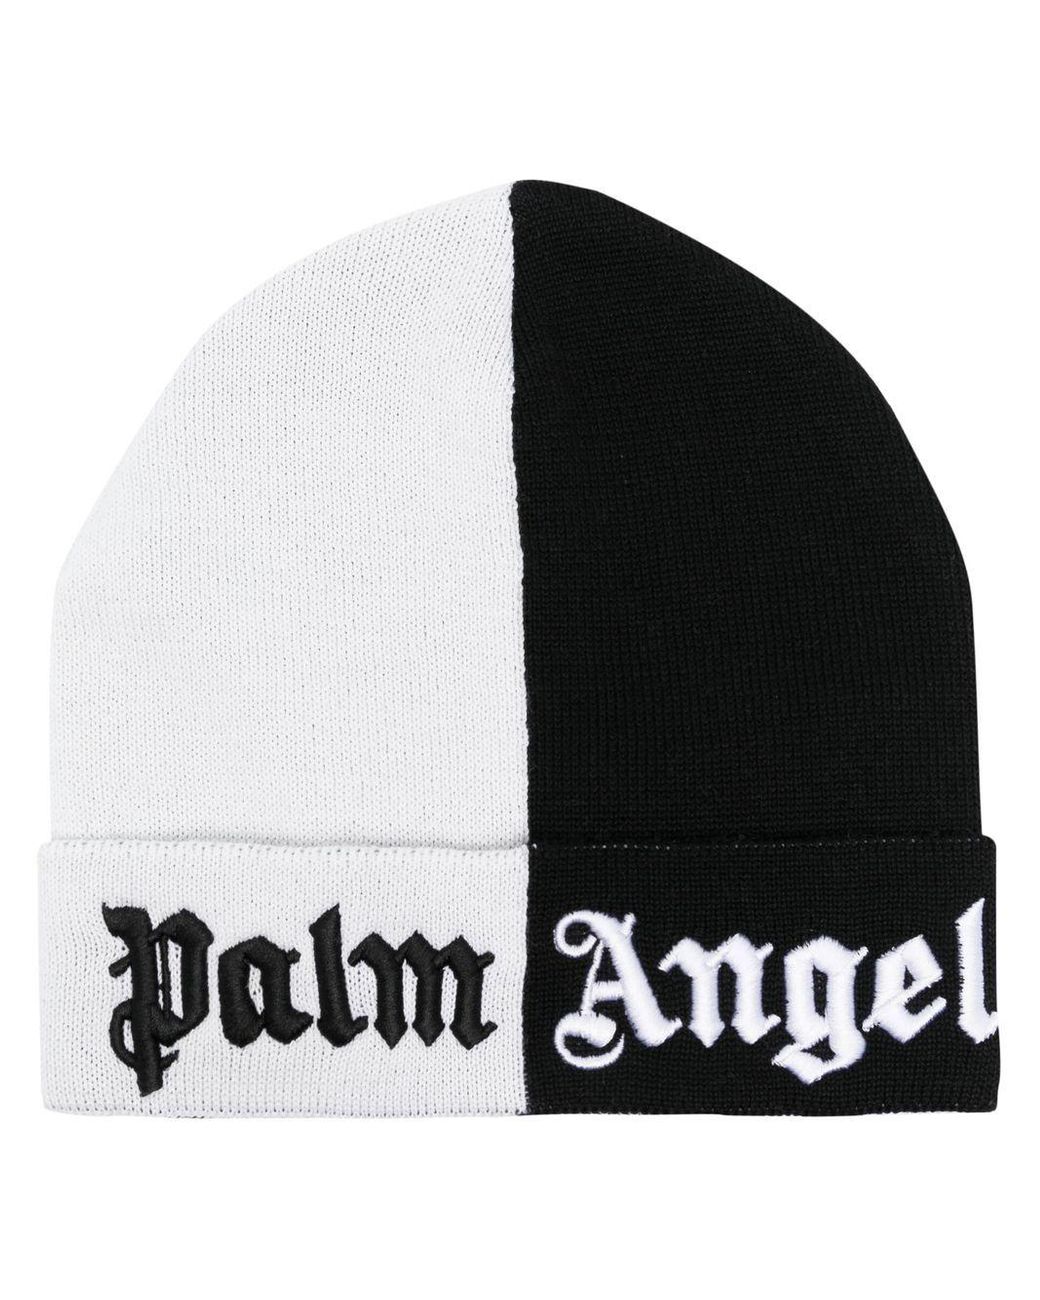 Mens Accessories Hats Palm Angels Logo Beanie in Black_white Black for Men 